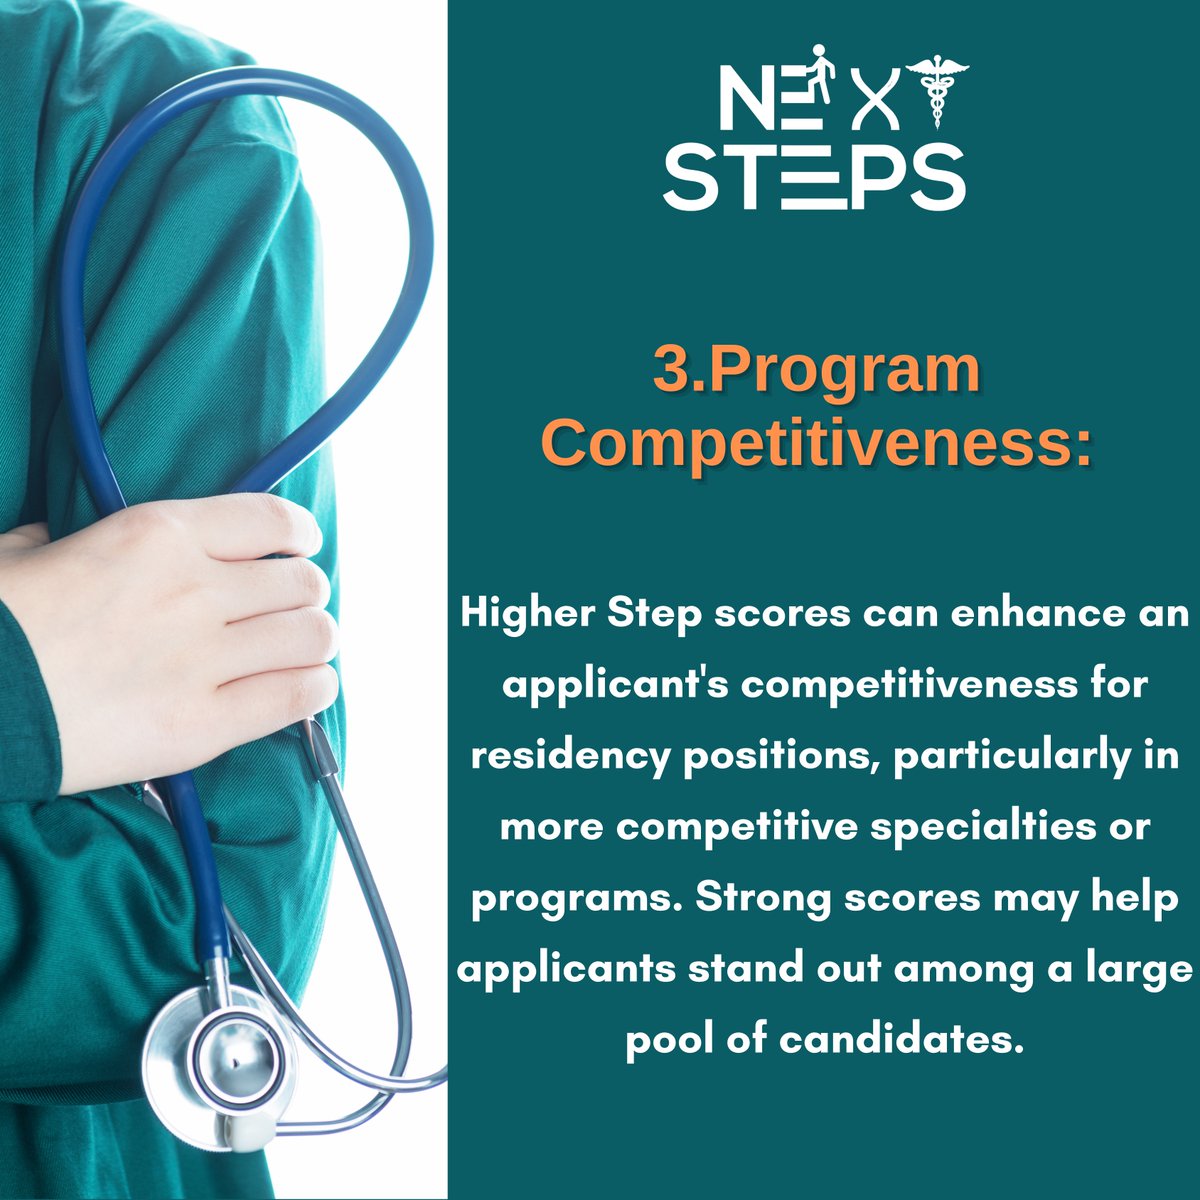 Unlock your residency dreams with strong USMLE Step scores! 🌟🎓
For USMLE  Residency Match: nextstepscareer.com/match-strategy/

#USMLE #Residency #residencymatch #usmlematch #match2024 #nextsteps #nextstepsusmle